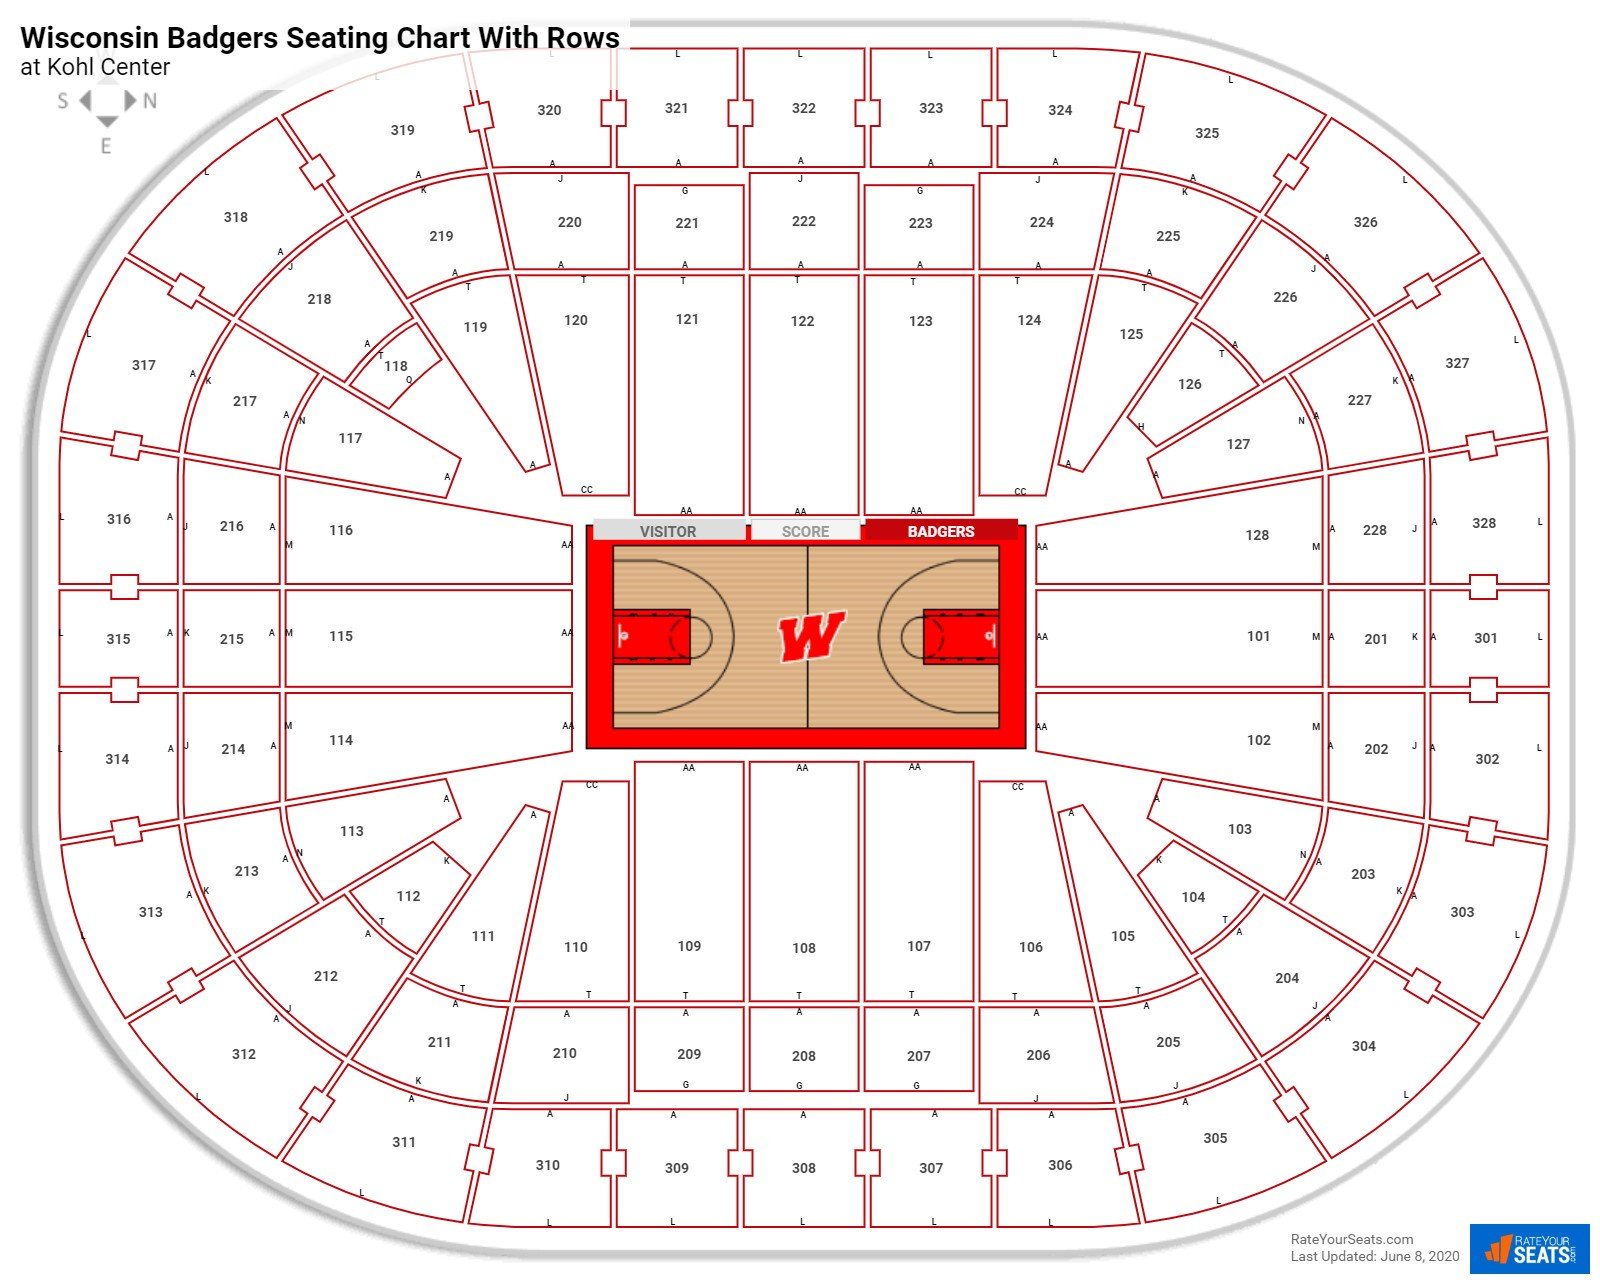 Kohl Center seating chart with row numbers